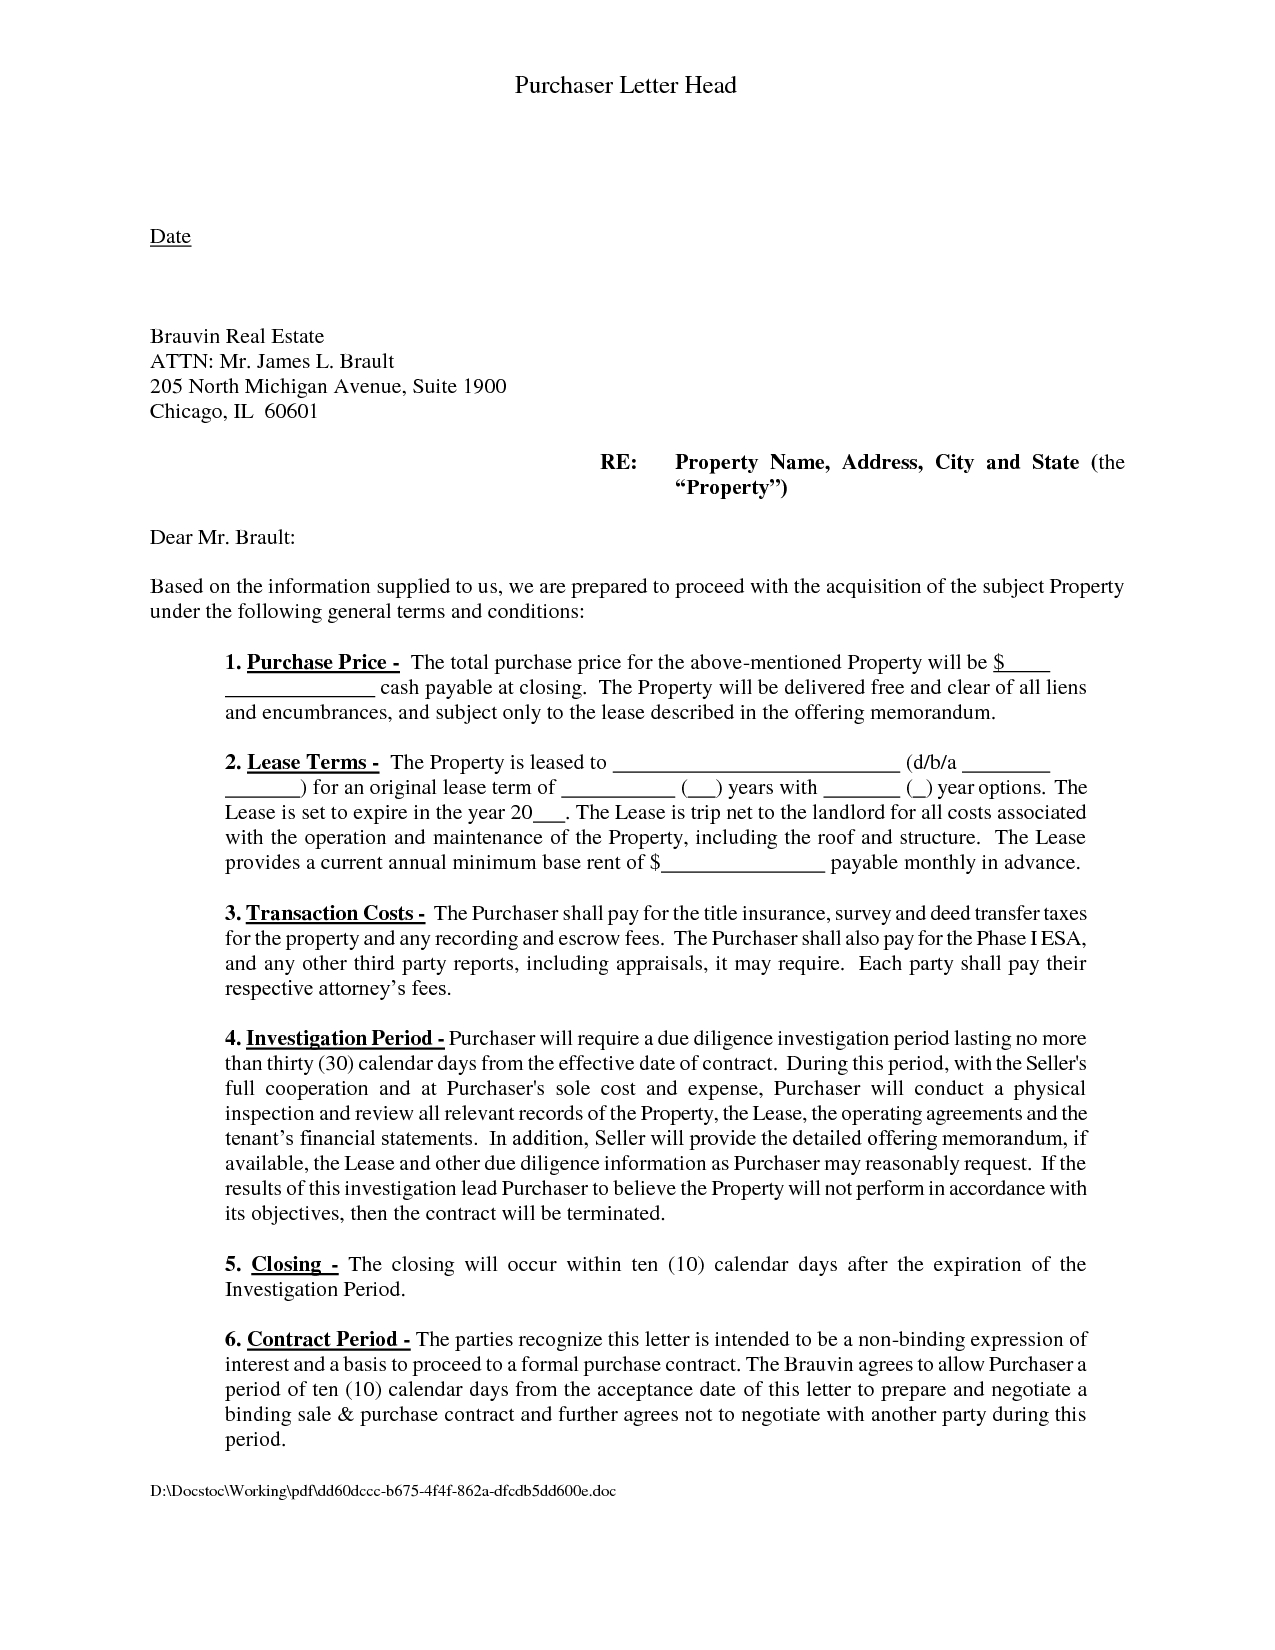 Letter Of Intent to Lease Commercial Space Template - Mercial Letter Intent Template to Lease Space Real Estate